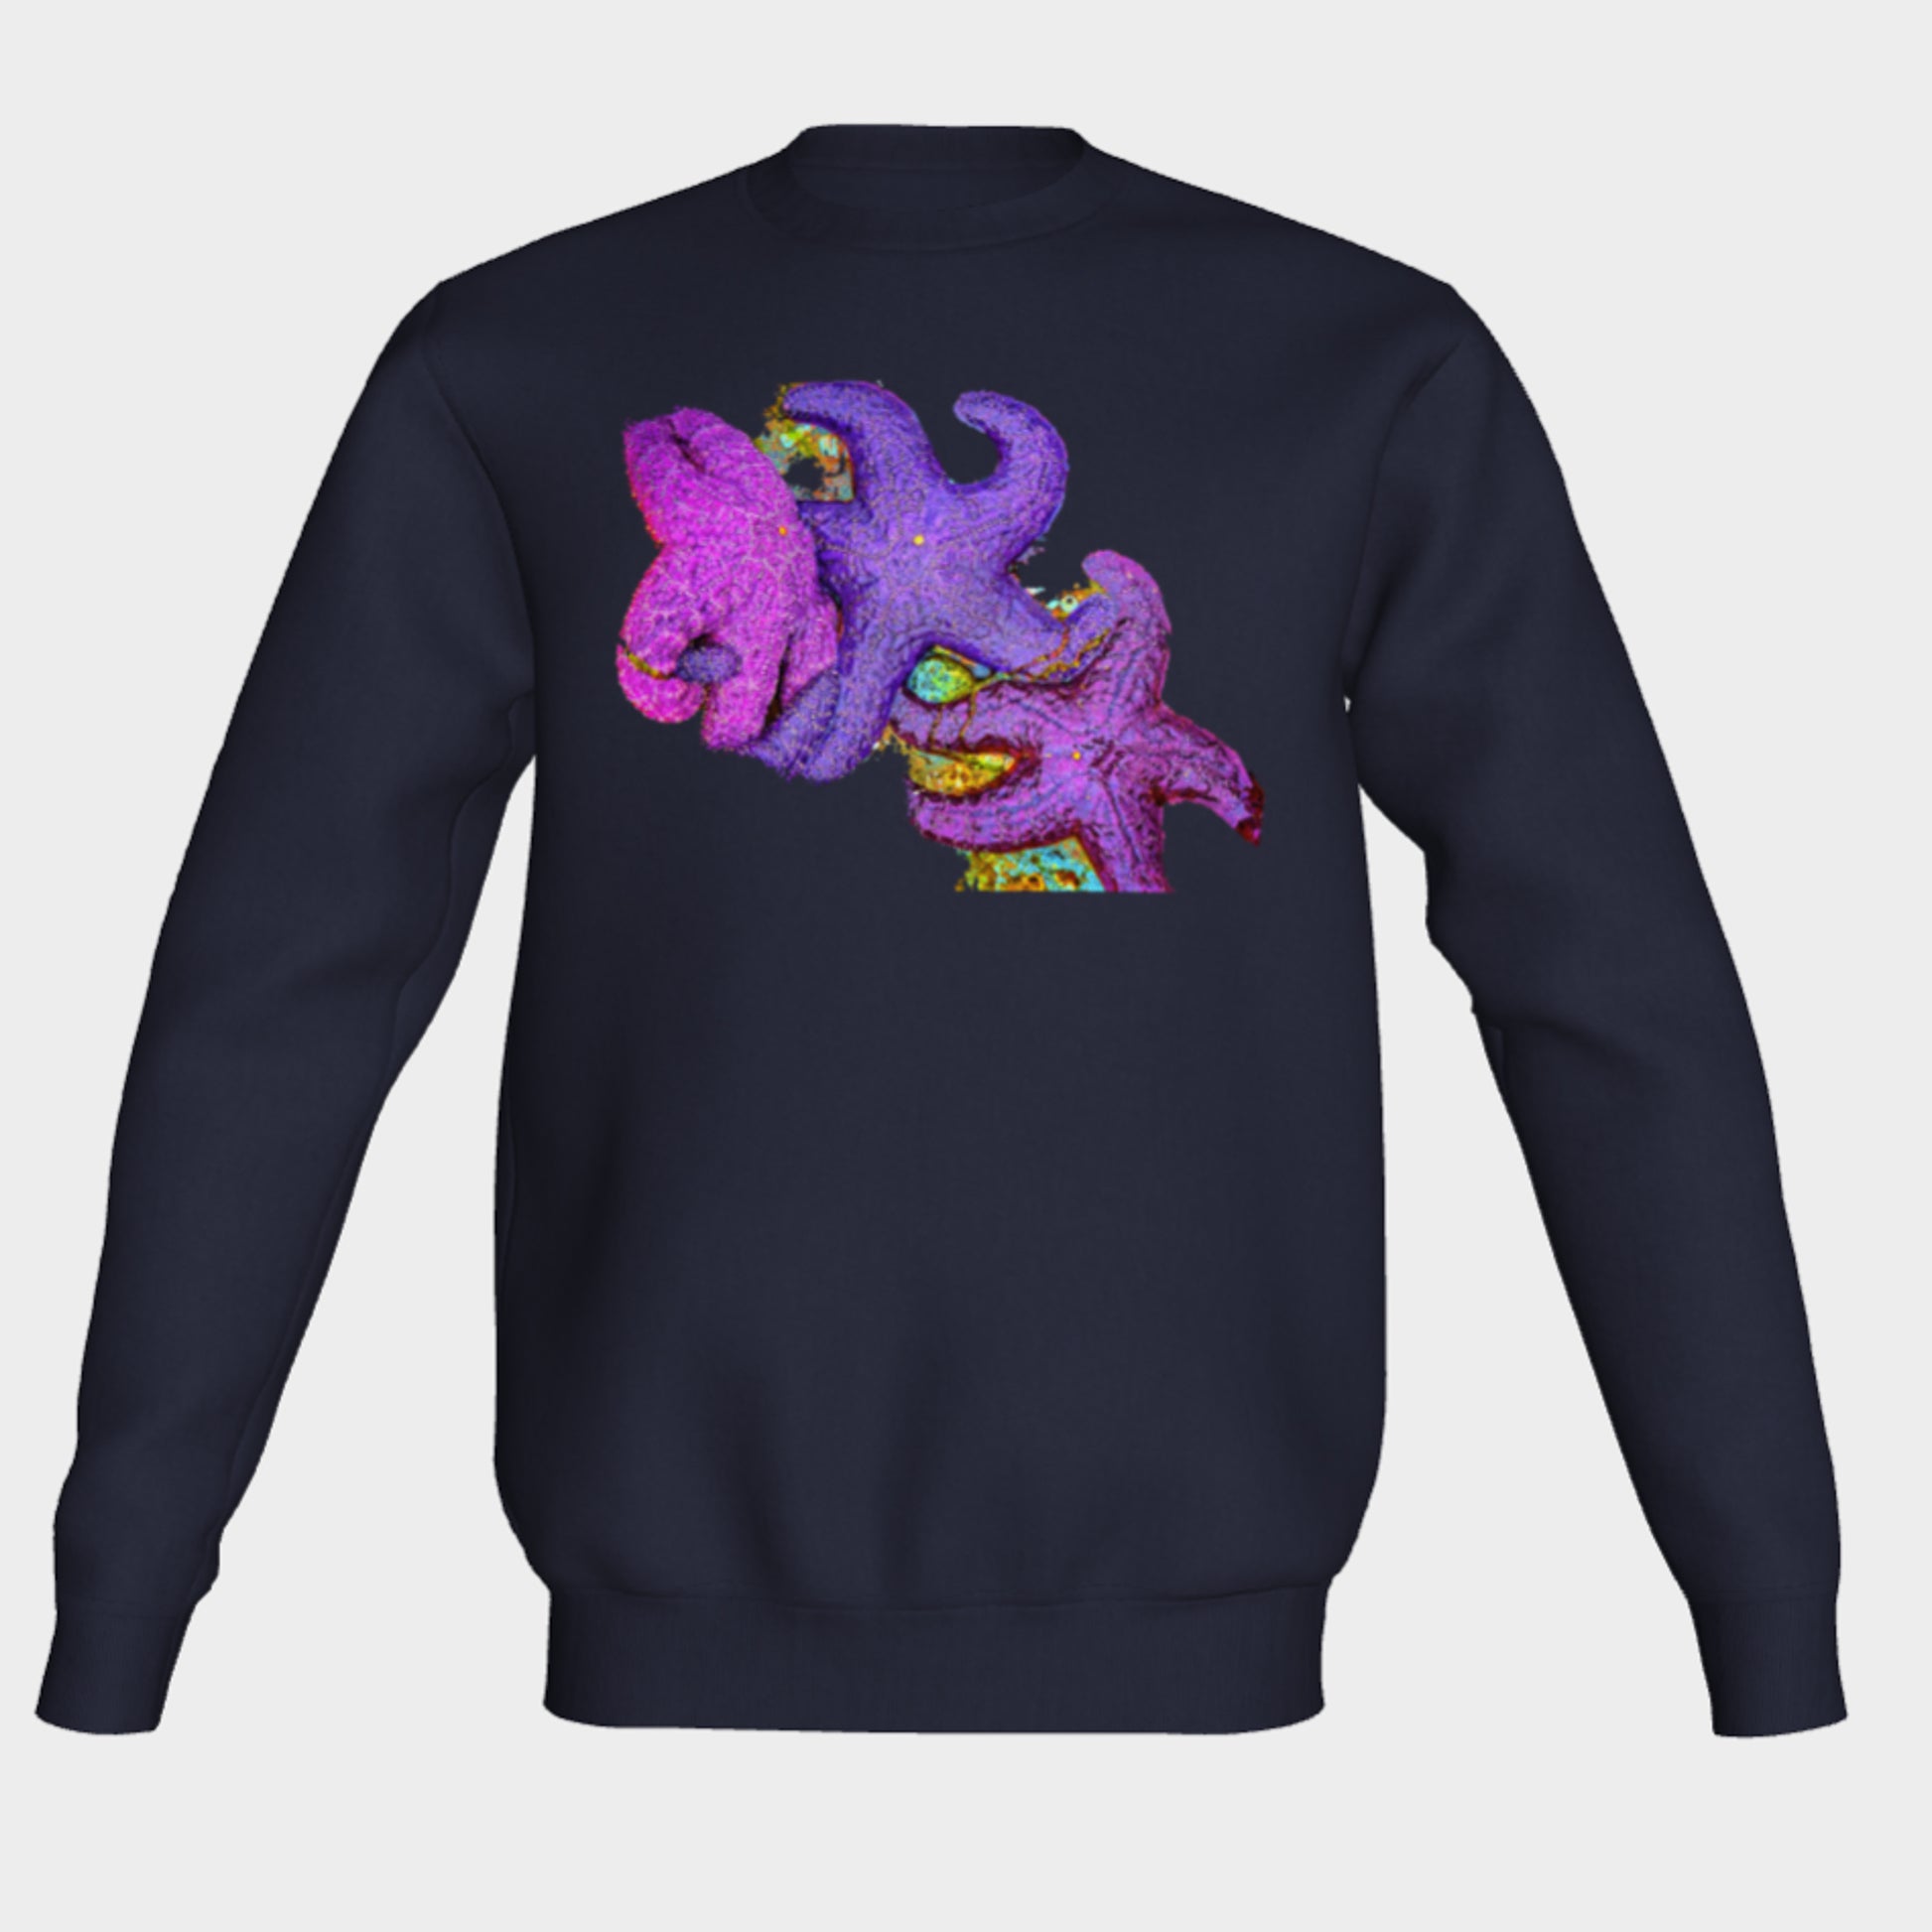 Starfish Cluster Crewneck Sweatshirt What’s better than a super cozy sweatshirt? A super cozy sweatshirt from Van Isle Goddess!  Super cozy unisex sweatshirt for those chilly days.  Excellent for men or women.   Fit is roomy and comfortable. 